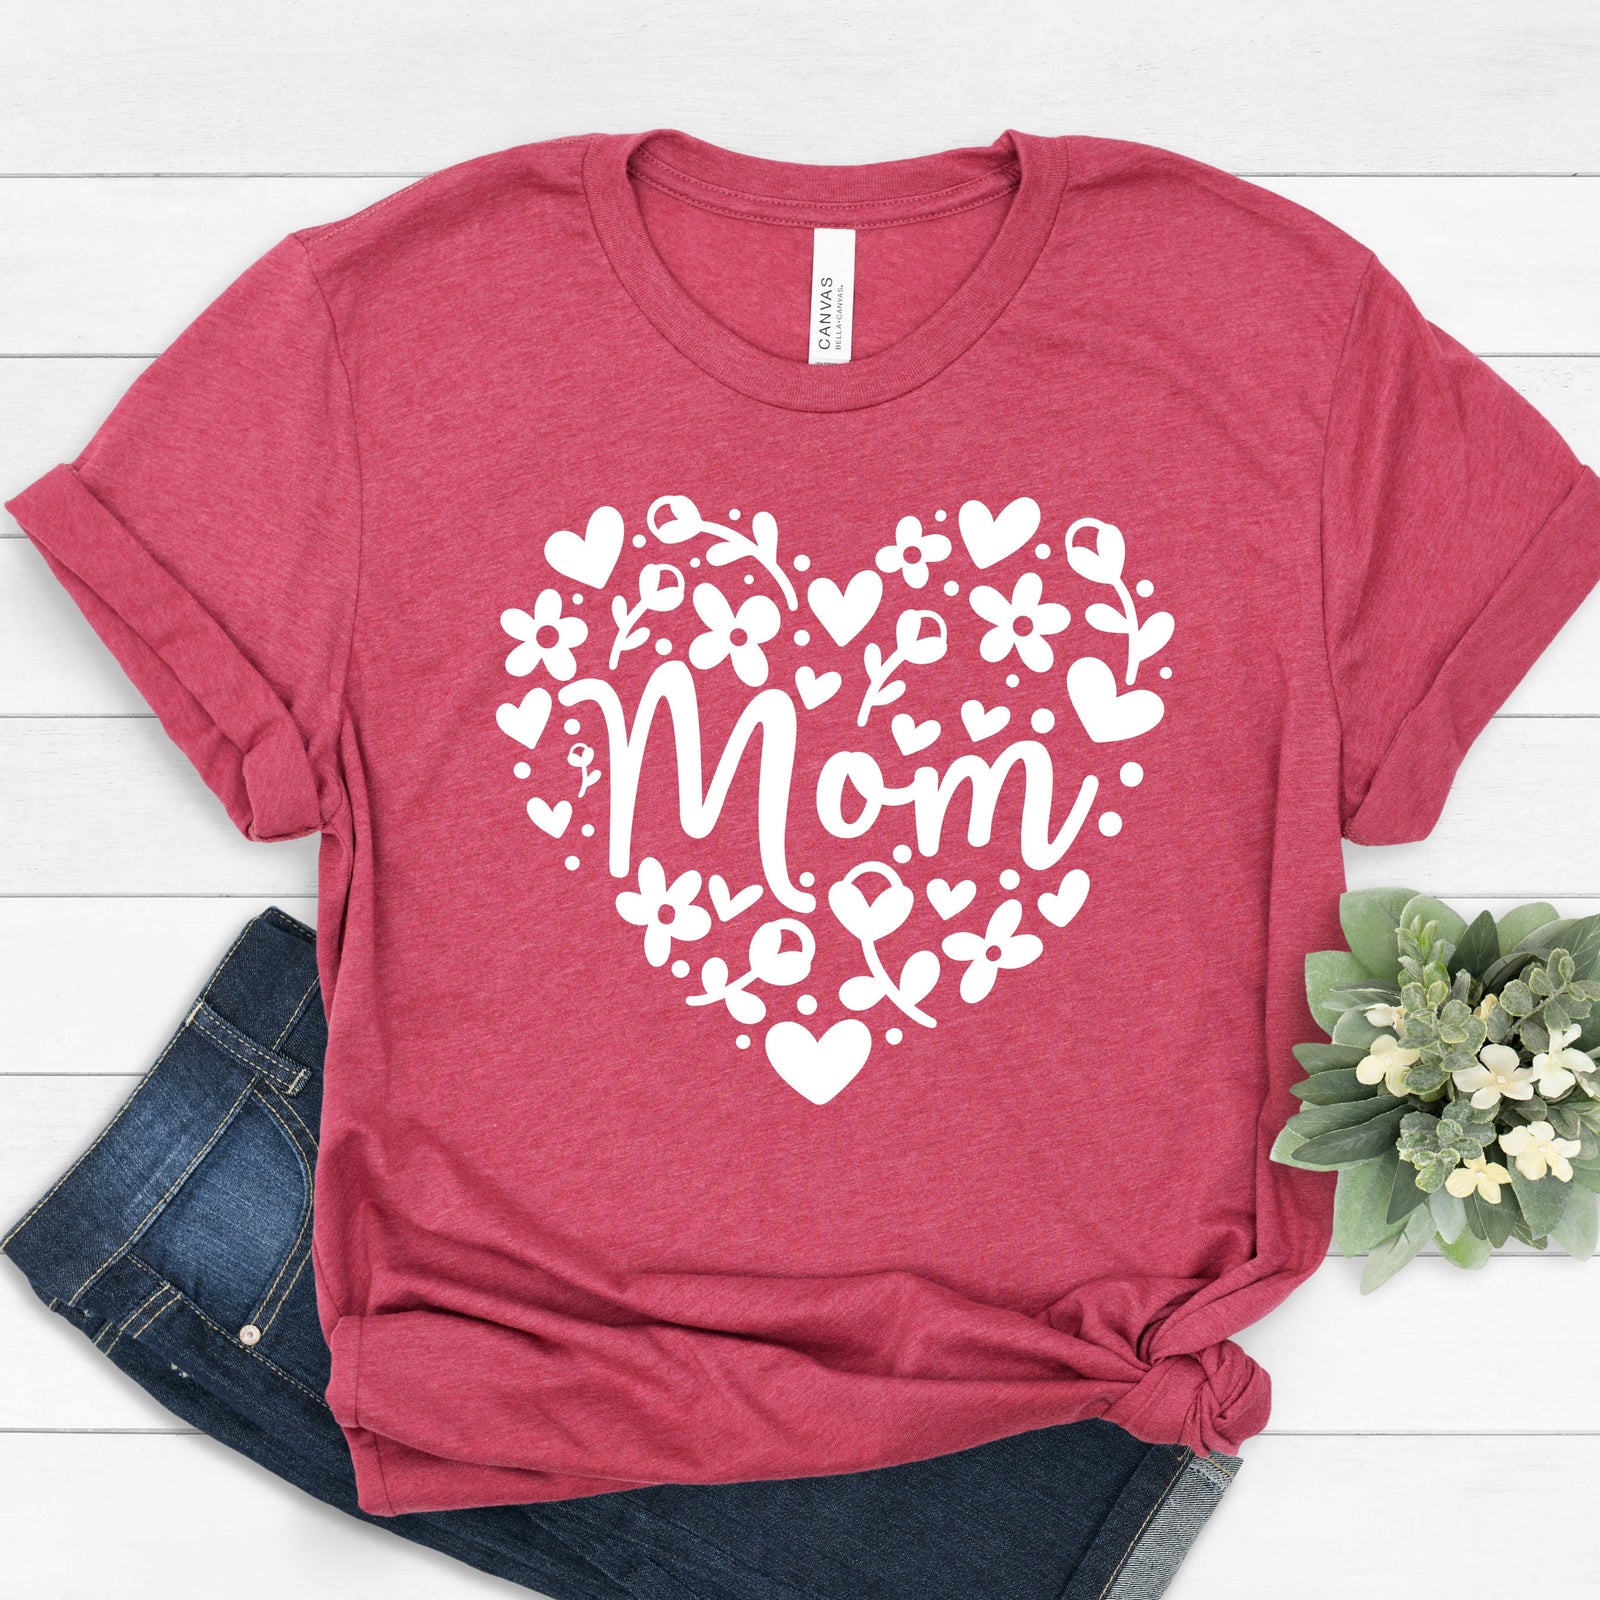 Mom T Shirt -Mother's Day Gift Idea - Grandma - Grandmother - Aunt - God Mother - Sister - Heart Love